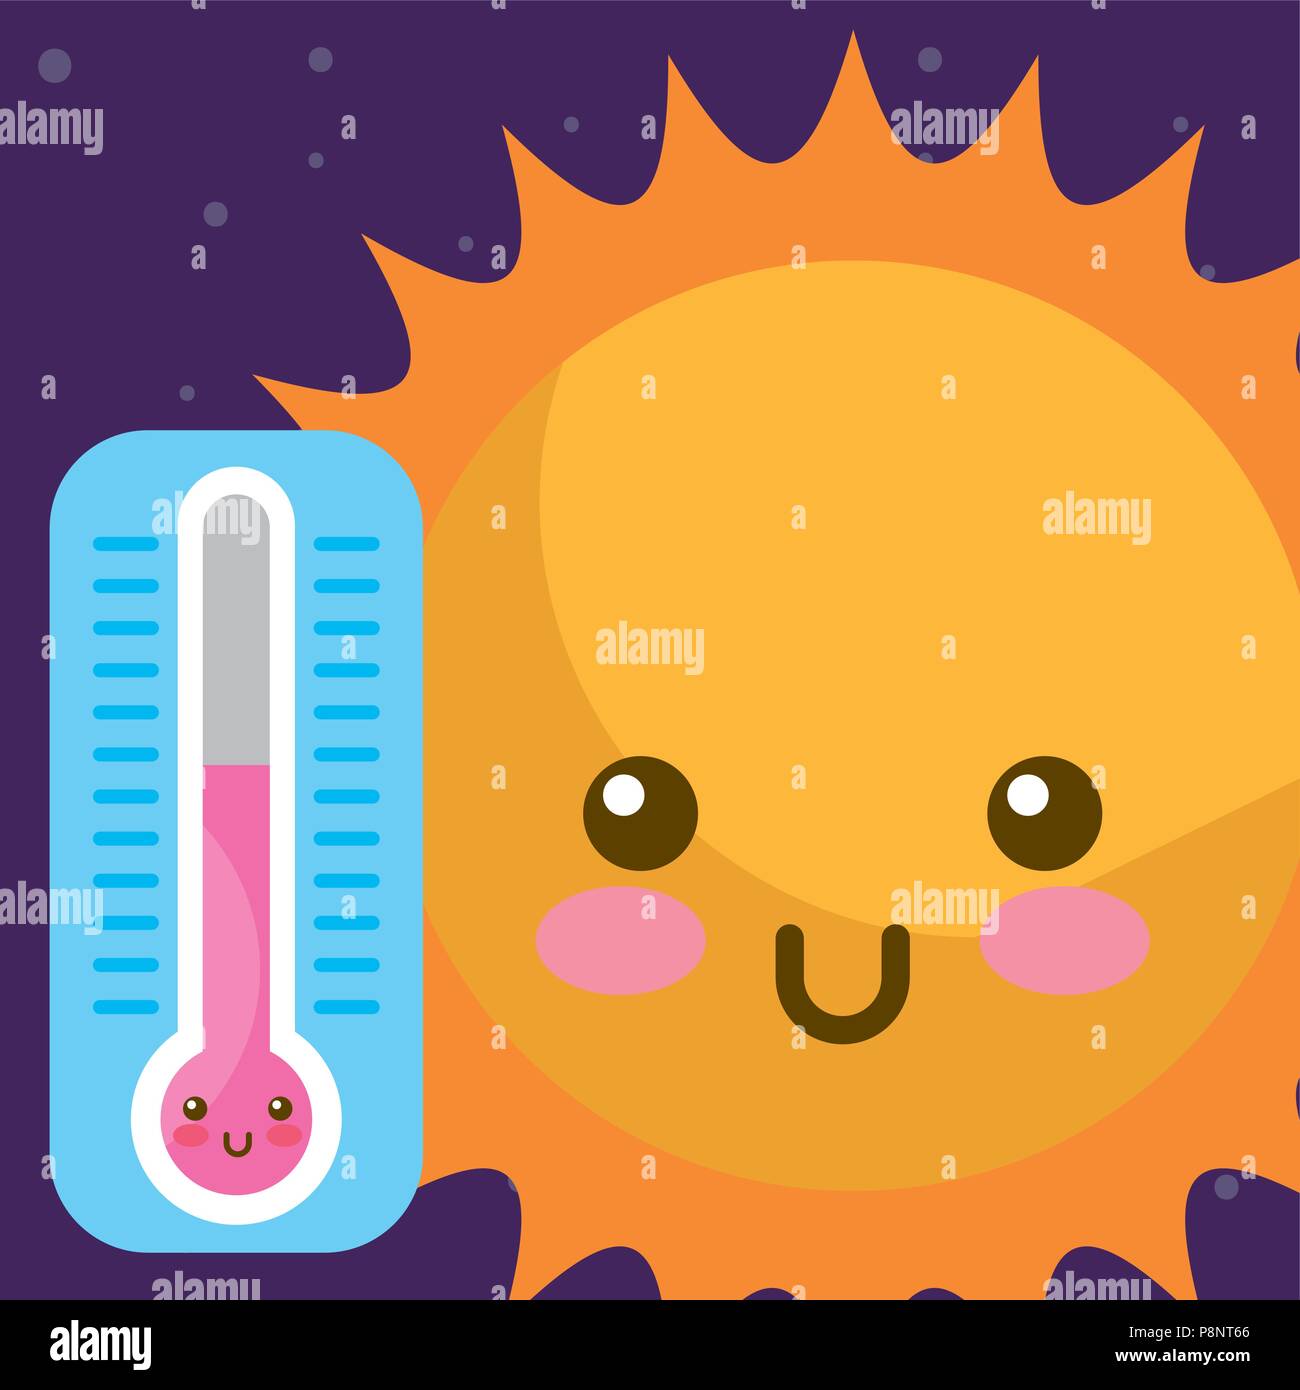 https://c8.alamy.com/comp/P8NT66/weather-kawaii-sun-and-thermometer-hot-vector-illustration-P8NT66.jpg